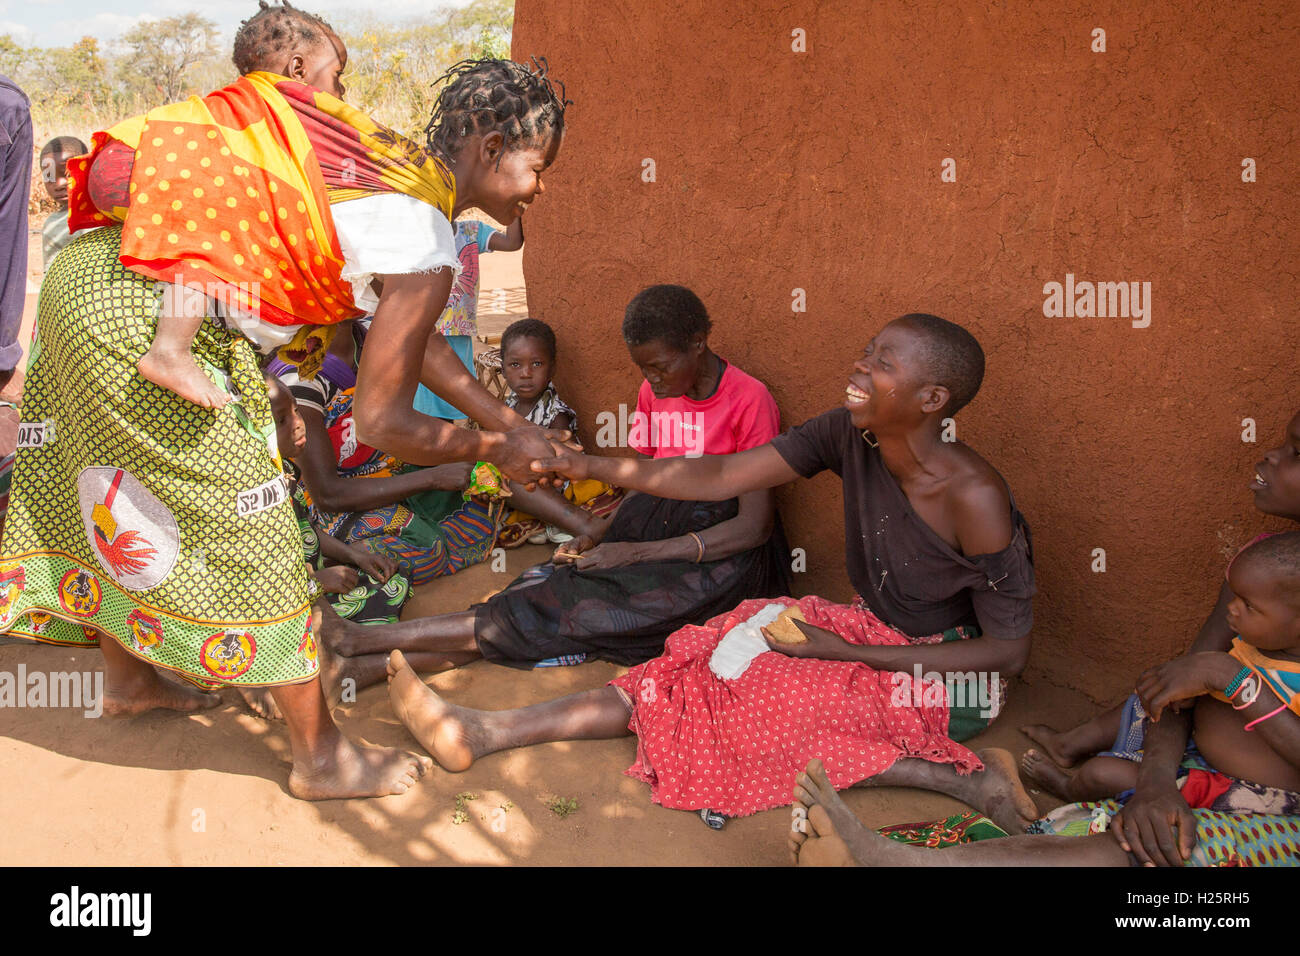 Lalaua district, Nampula Province, Mozambique, August 2015: Laurinda Diago greets with friends and family at home after cataract operations in both eyes have restored her sight.    Photo by Mike Goldwater Stock Photo